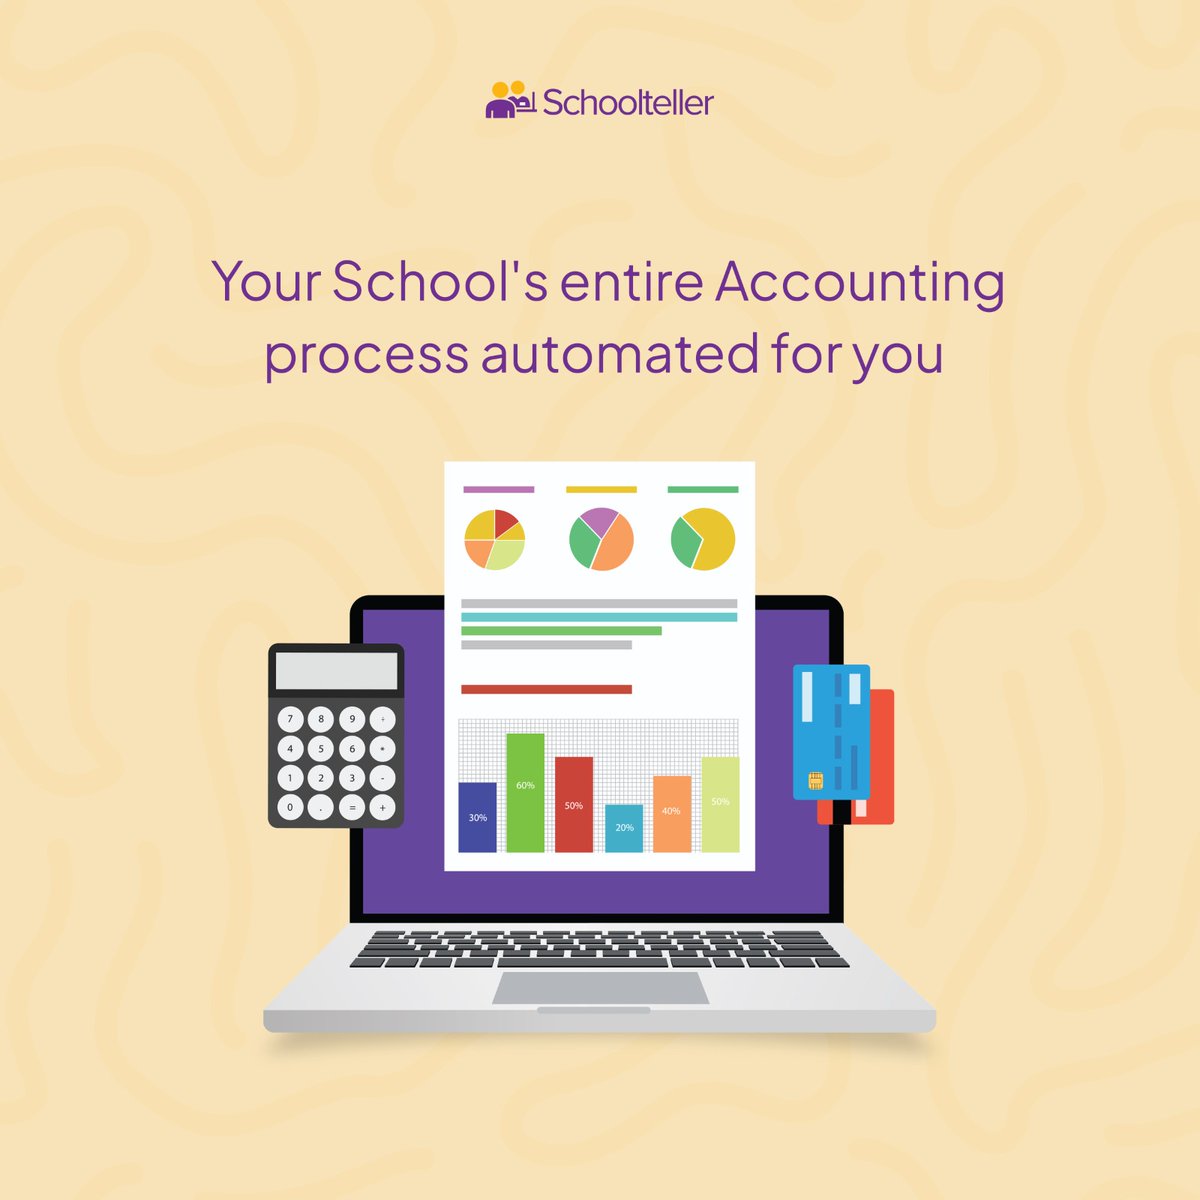 Our platform automates your School's entire accounting process, enabling you to easily manage your school's finances in real-time. 

Sign up your School at Schoolteller.ng or call us at 07053944594 to learn more. 

#financemanager #schoolfees #education  #edtechteachers